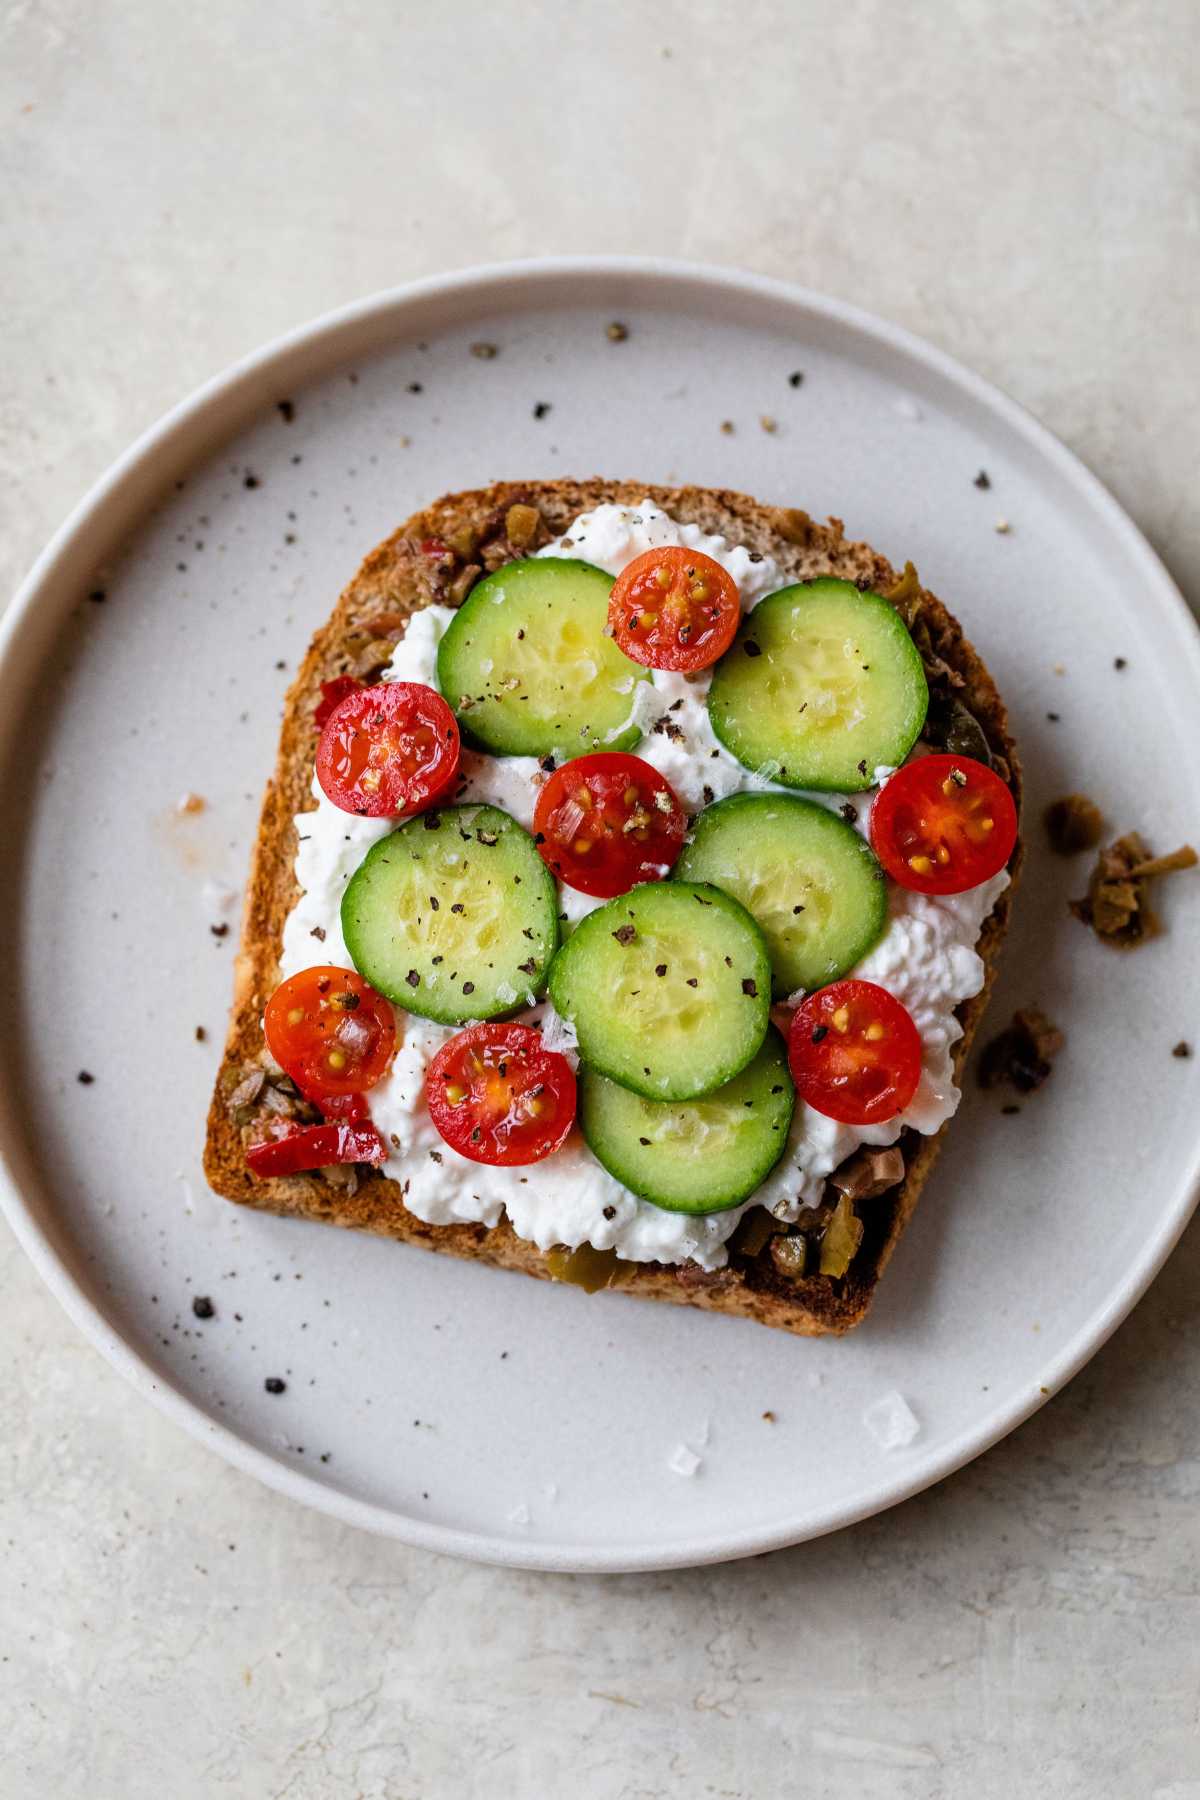 Toast with black olive tapenade, cottage cheese, sliced cucumbers, sliced cherry tomatoes and a sprinkle of salt and black pepper.